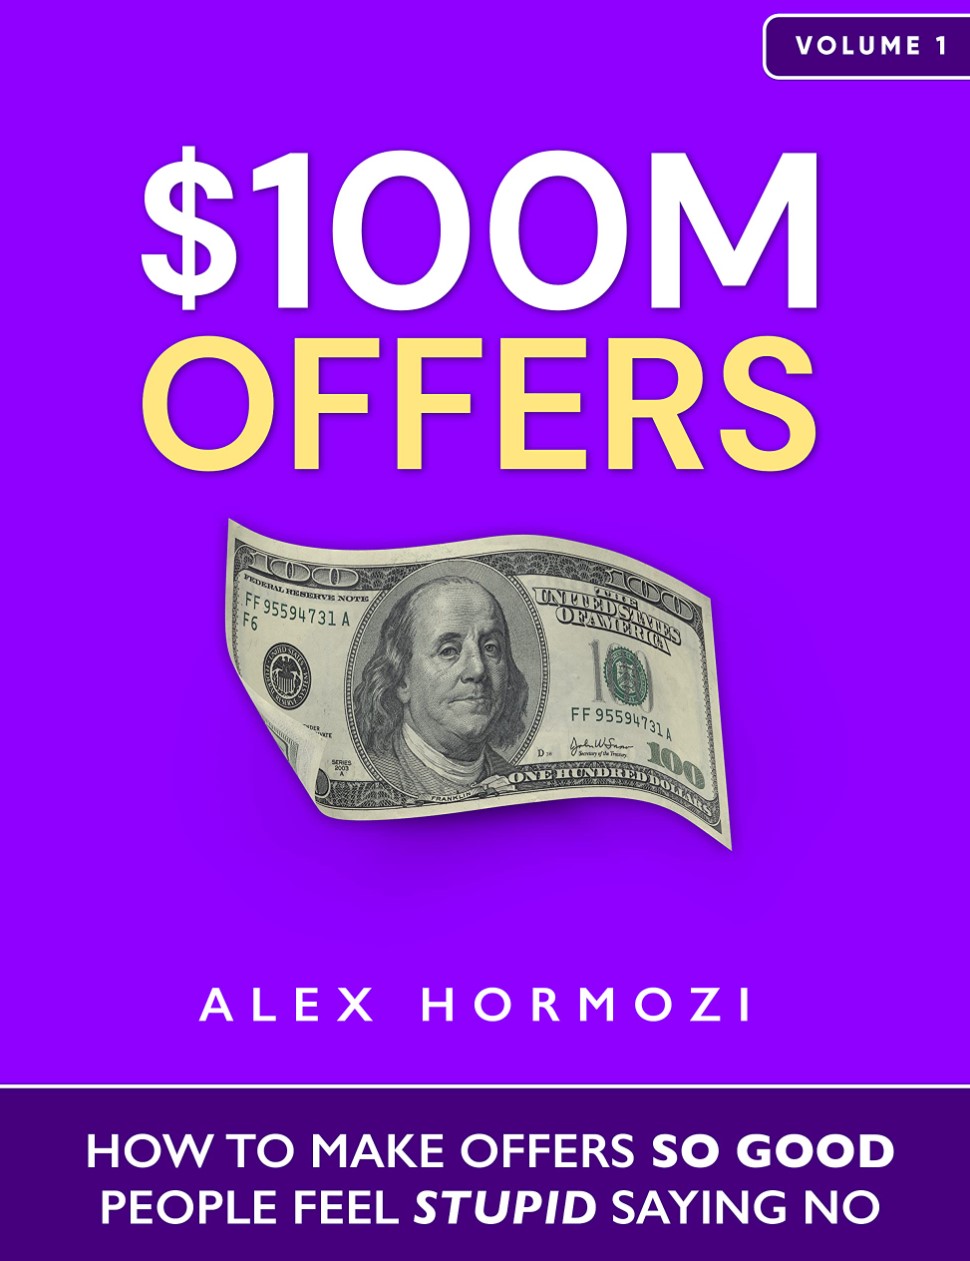 B2B outbound marketing strategy book cover featuring a $100 bill, highlighting enticing offers